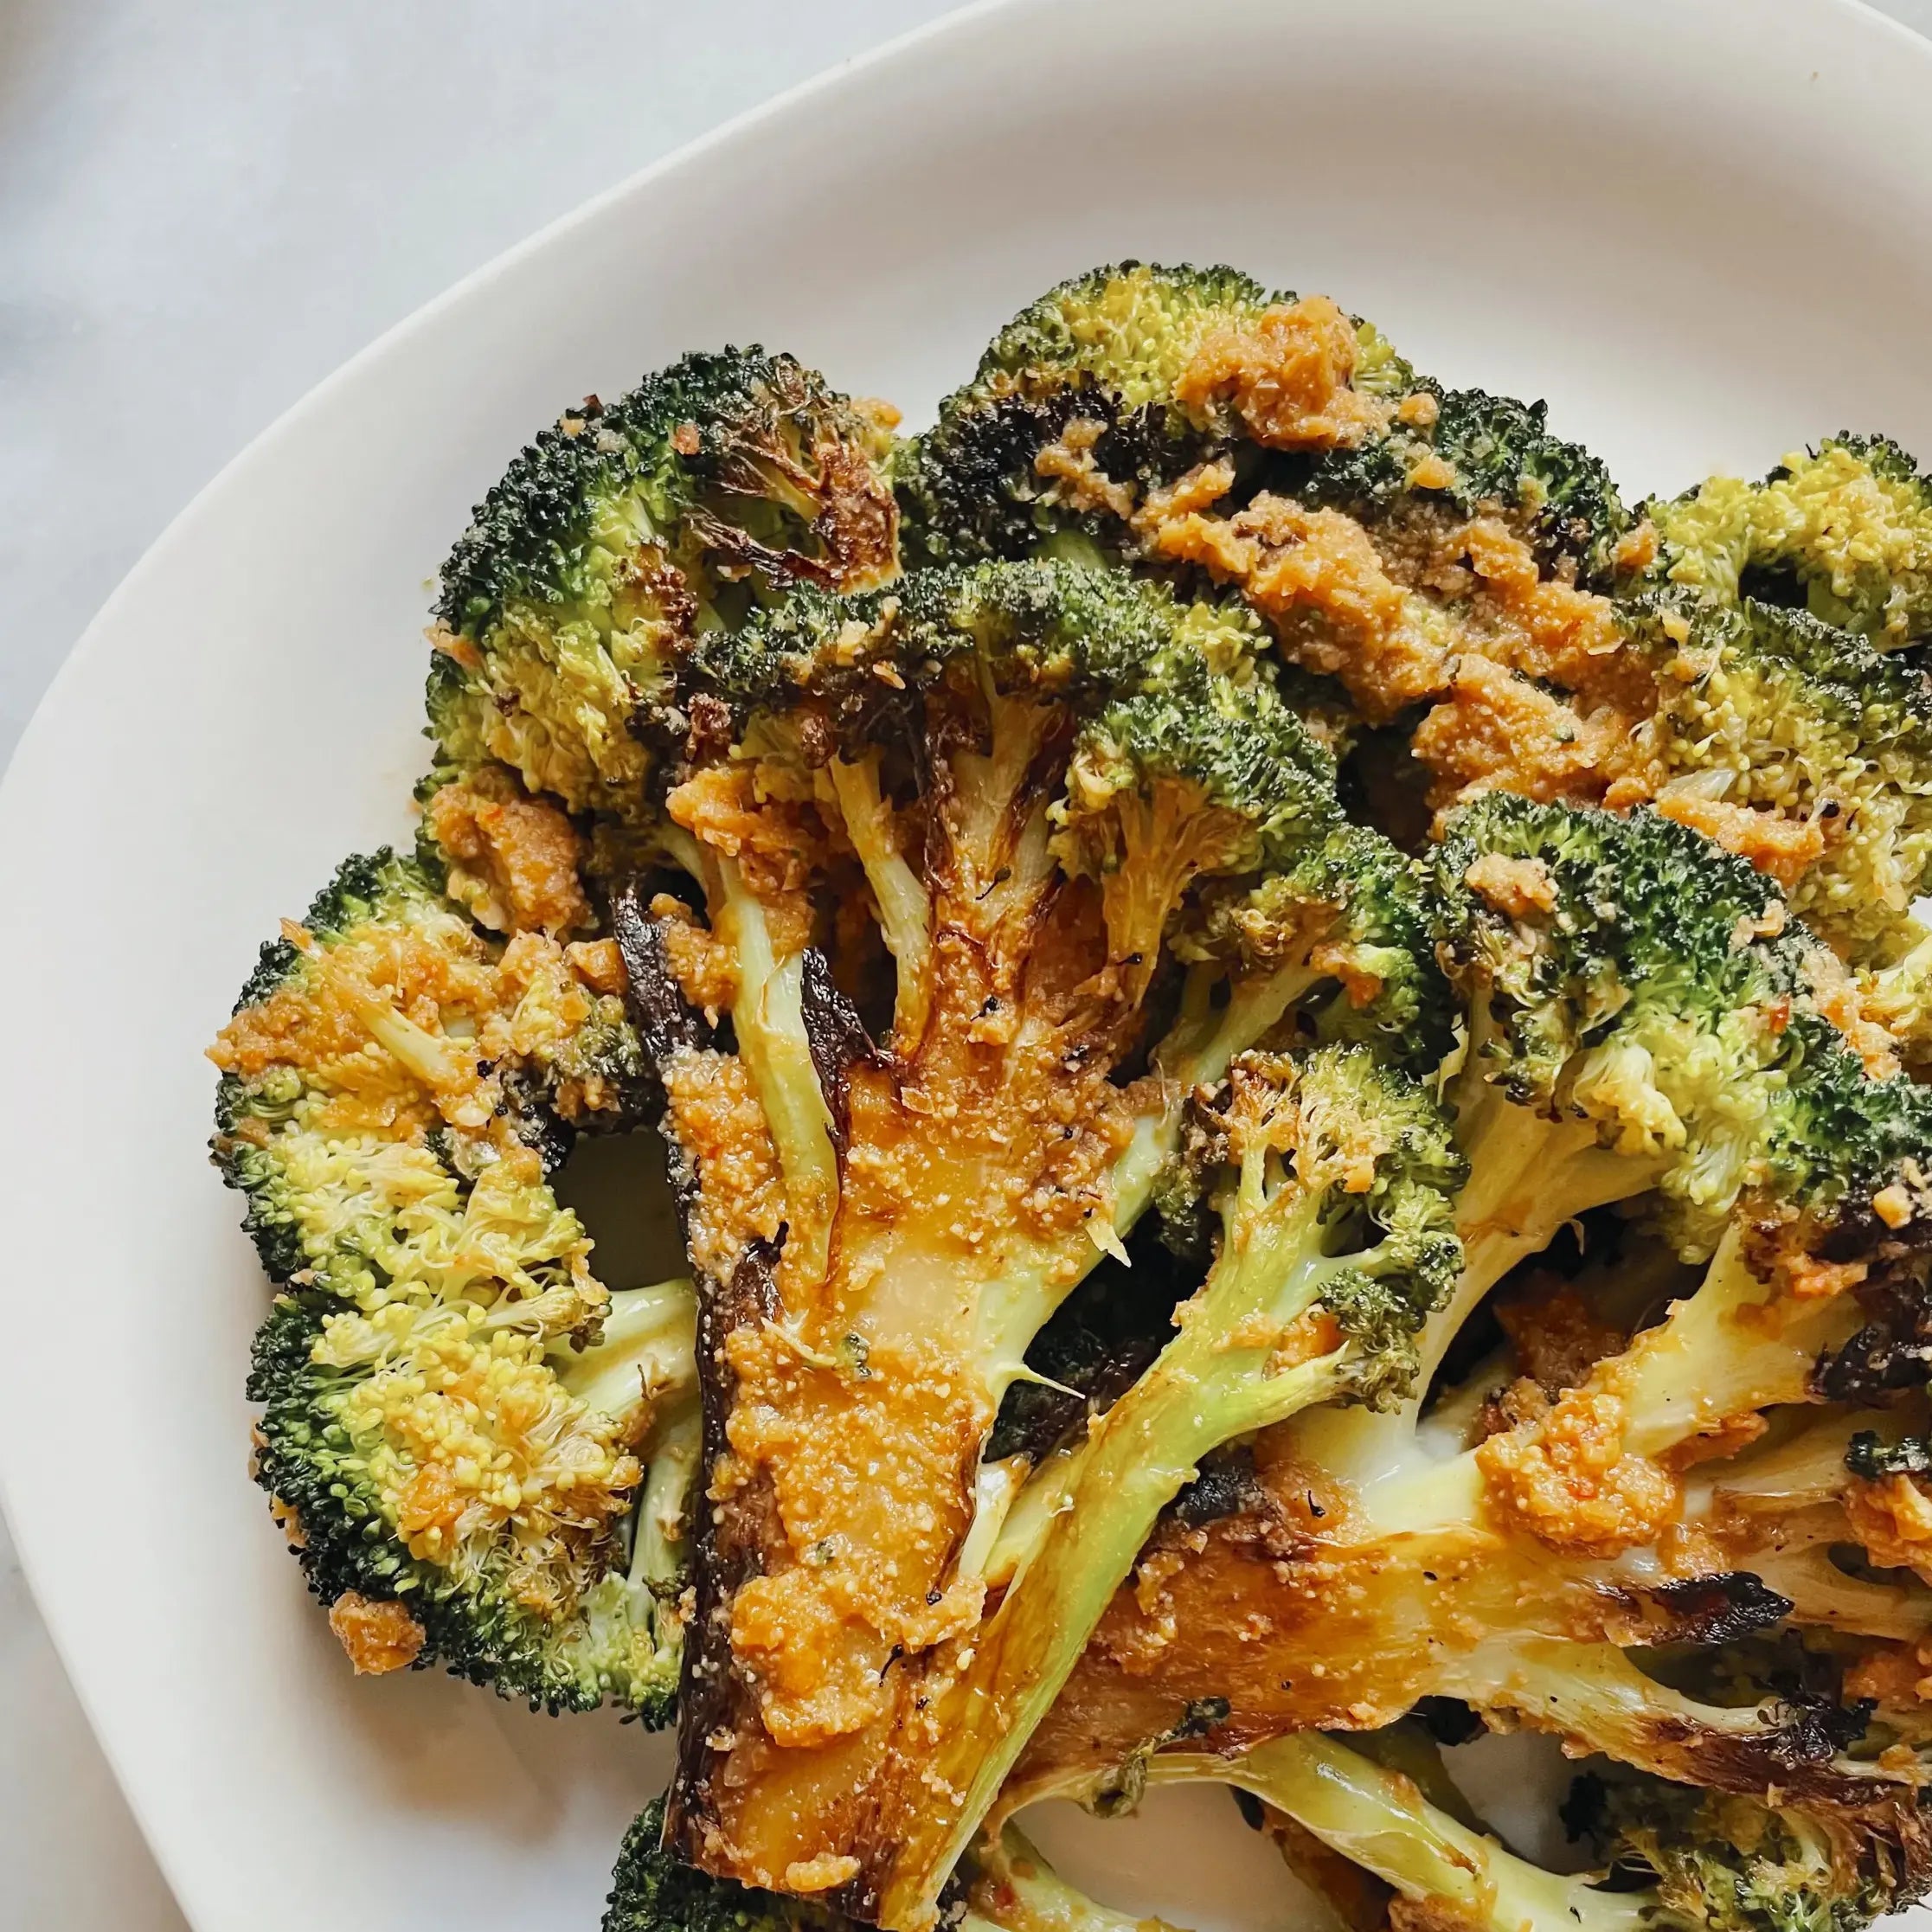 ROASTED BROCCOLI WITH SPICY HUMMUS SAUCE